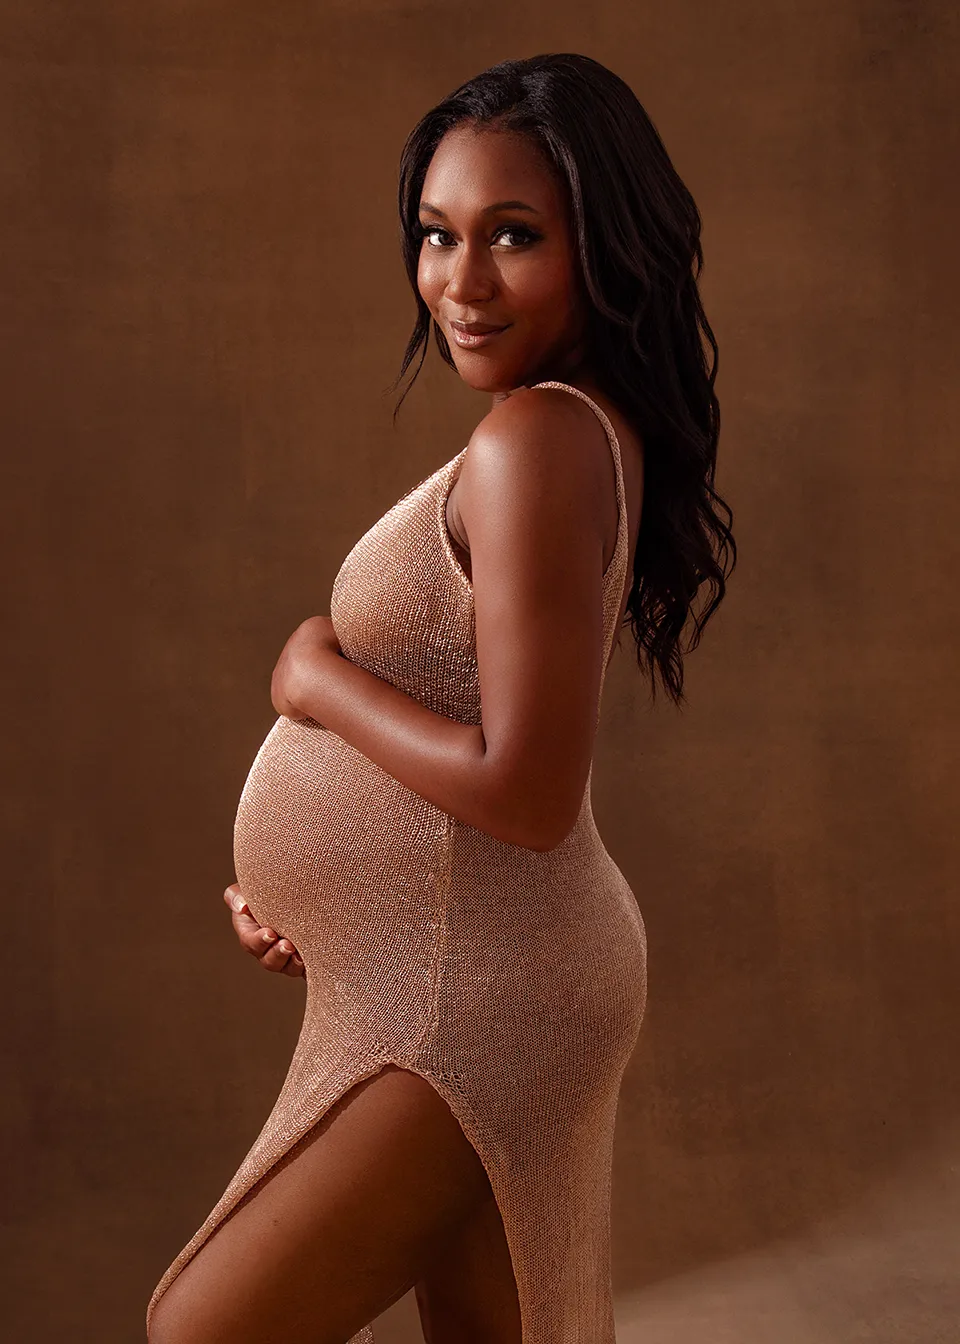 Maternity photograph of a pregnant woman wearing a golden dress with a golden background behind her. The portrait is a fashion inspired maternity photograph.